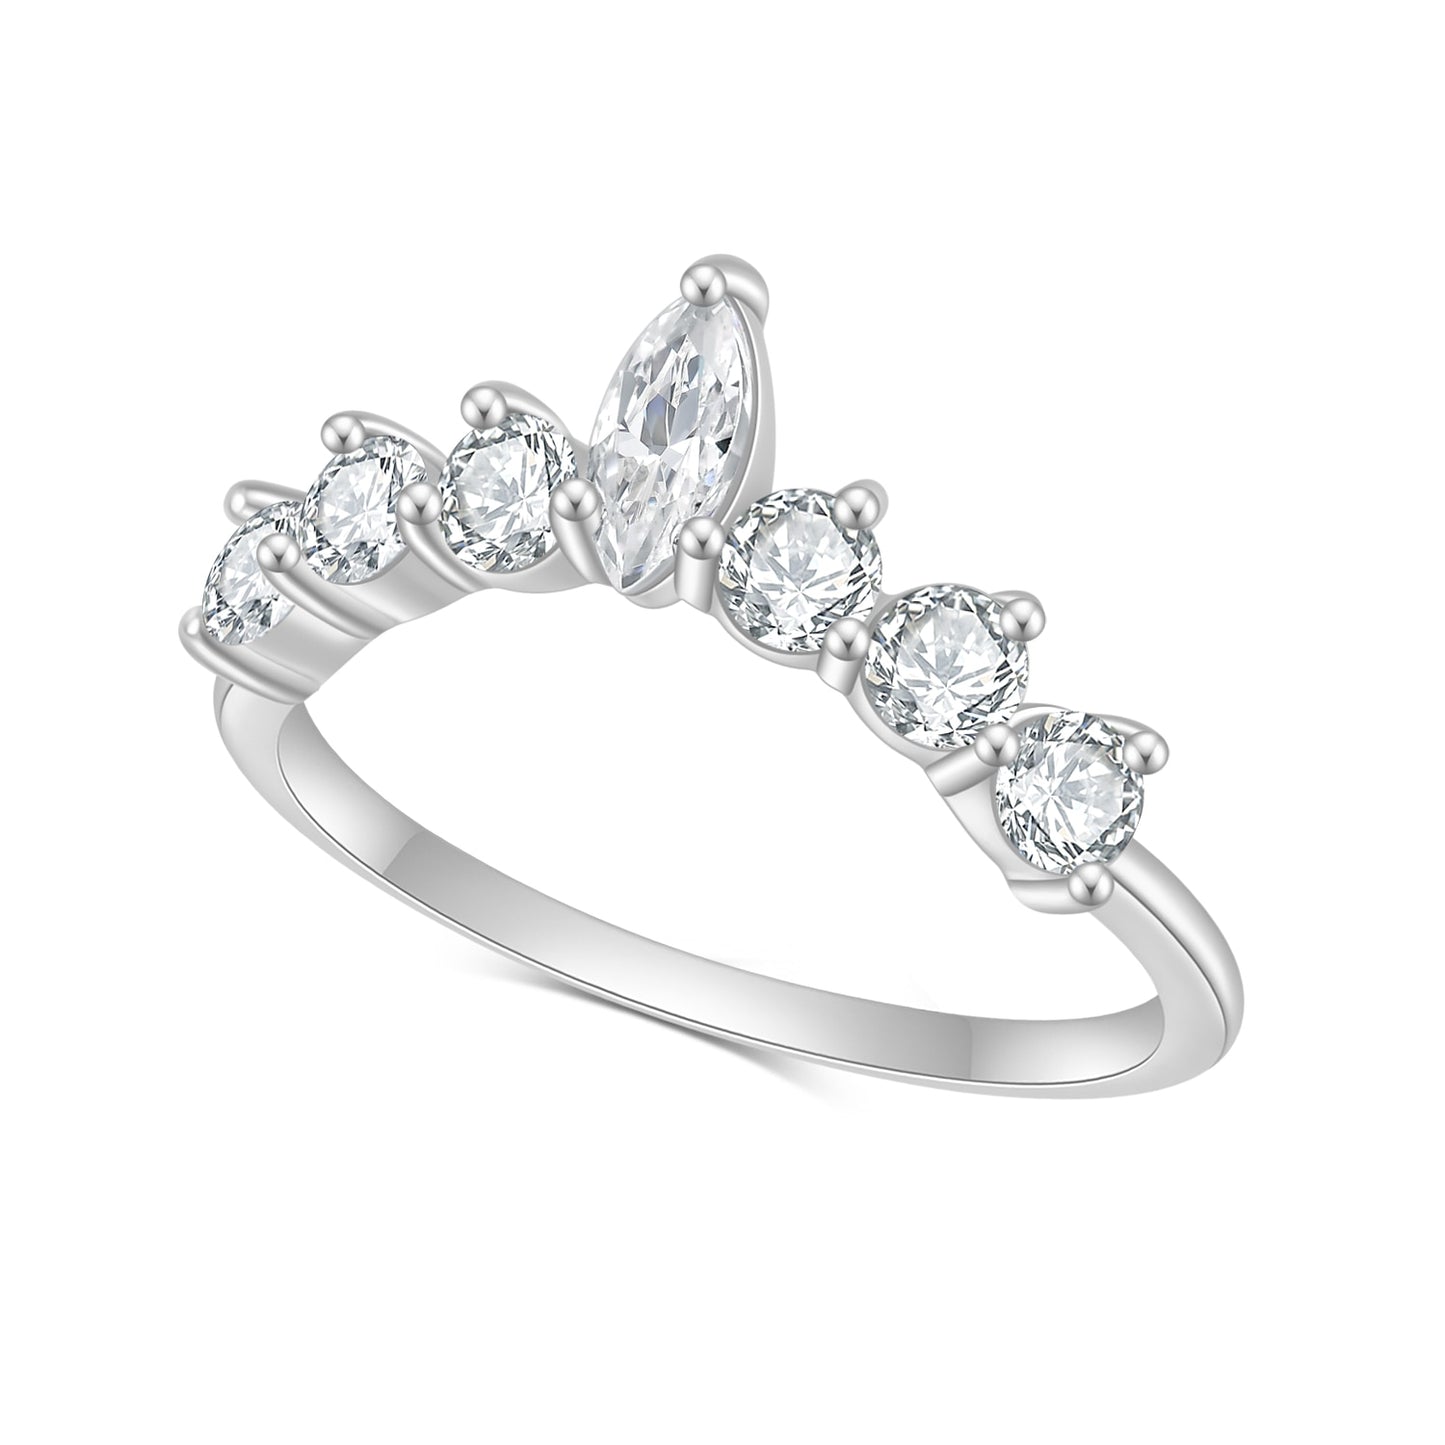 A silver slightly curved wedding ring with small round moissanites and a marquise moissanite in the center.